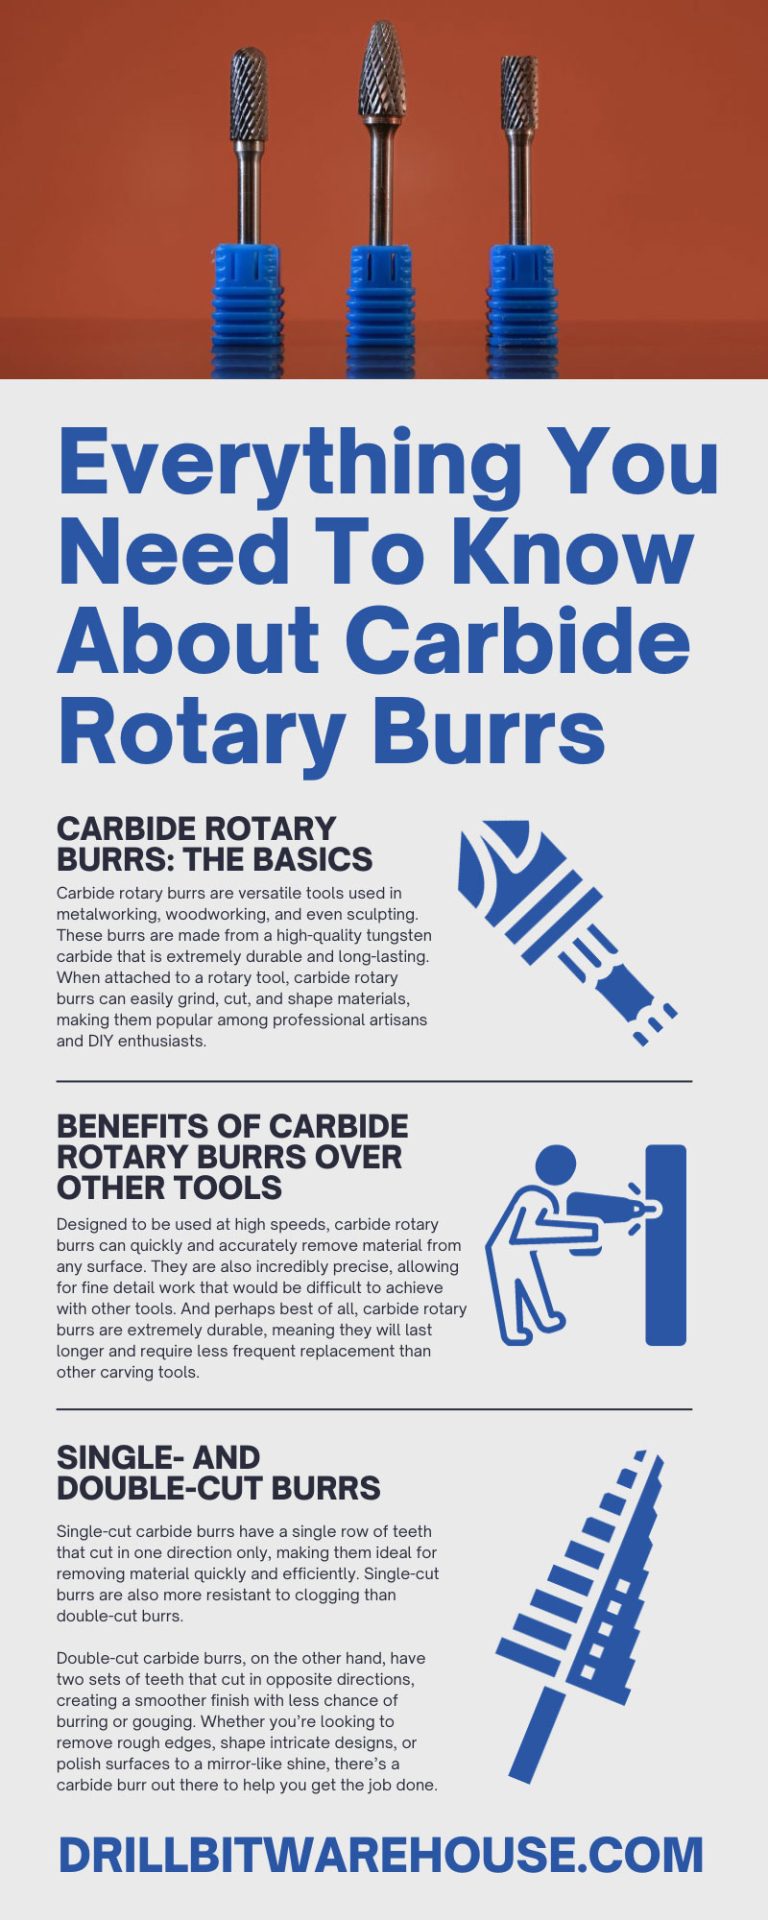 Everything You Need To Know About Carbide Rotary Burrs
